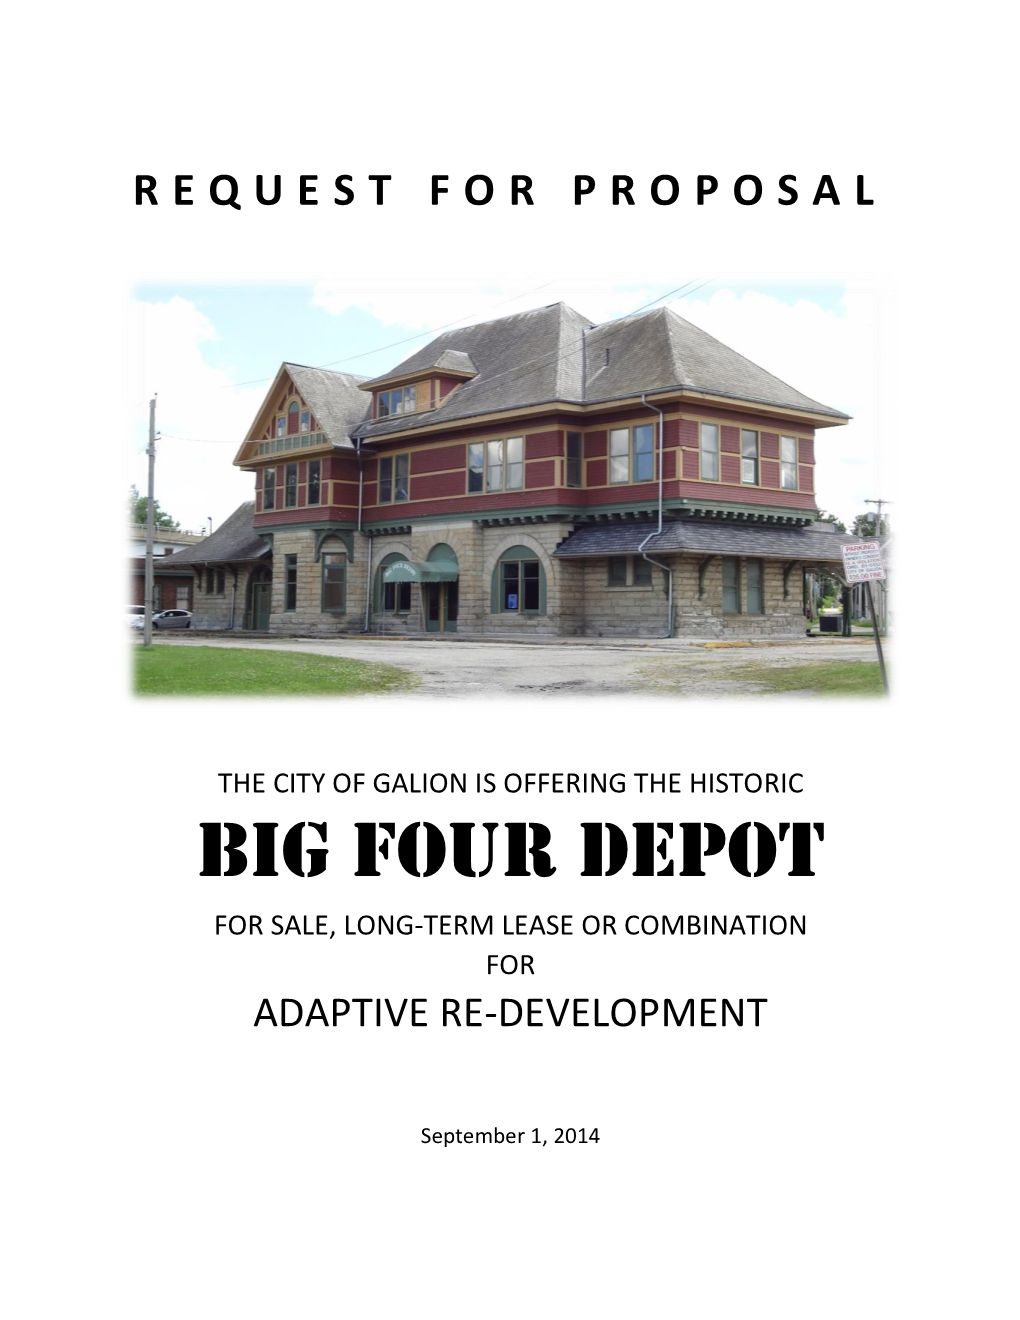 Big Four Depot for Sale, Long-Term Lease Or Combination for Adaptive Re-Development